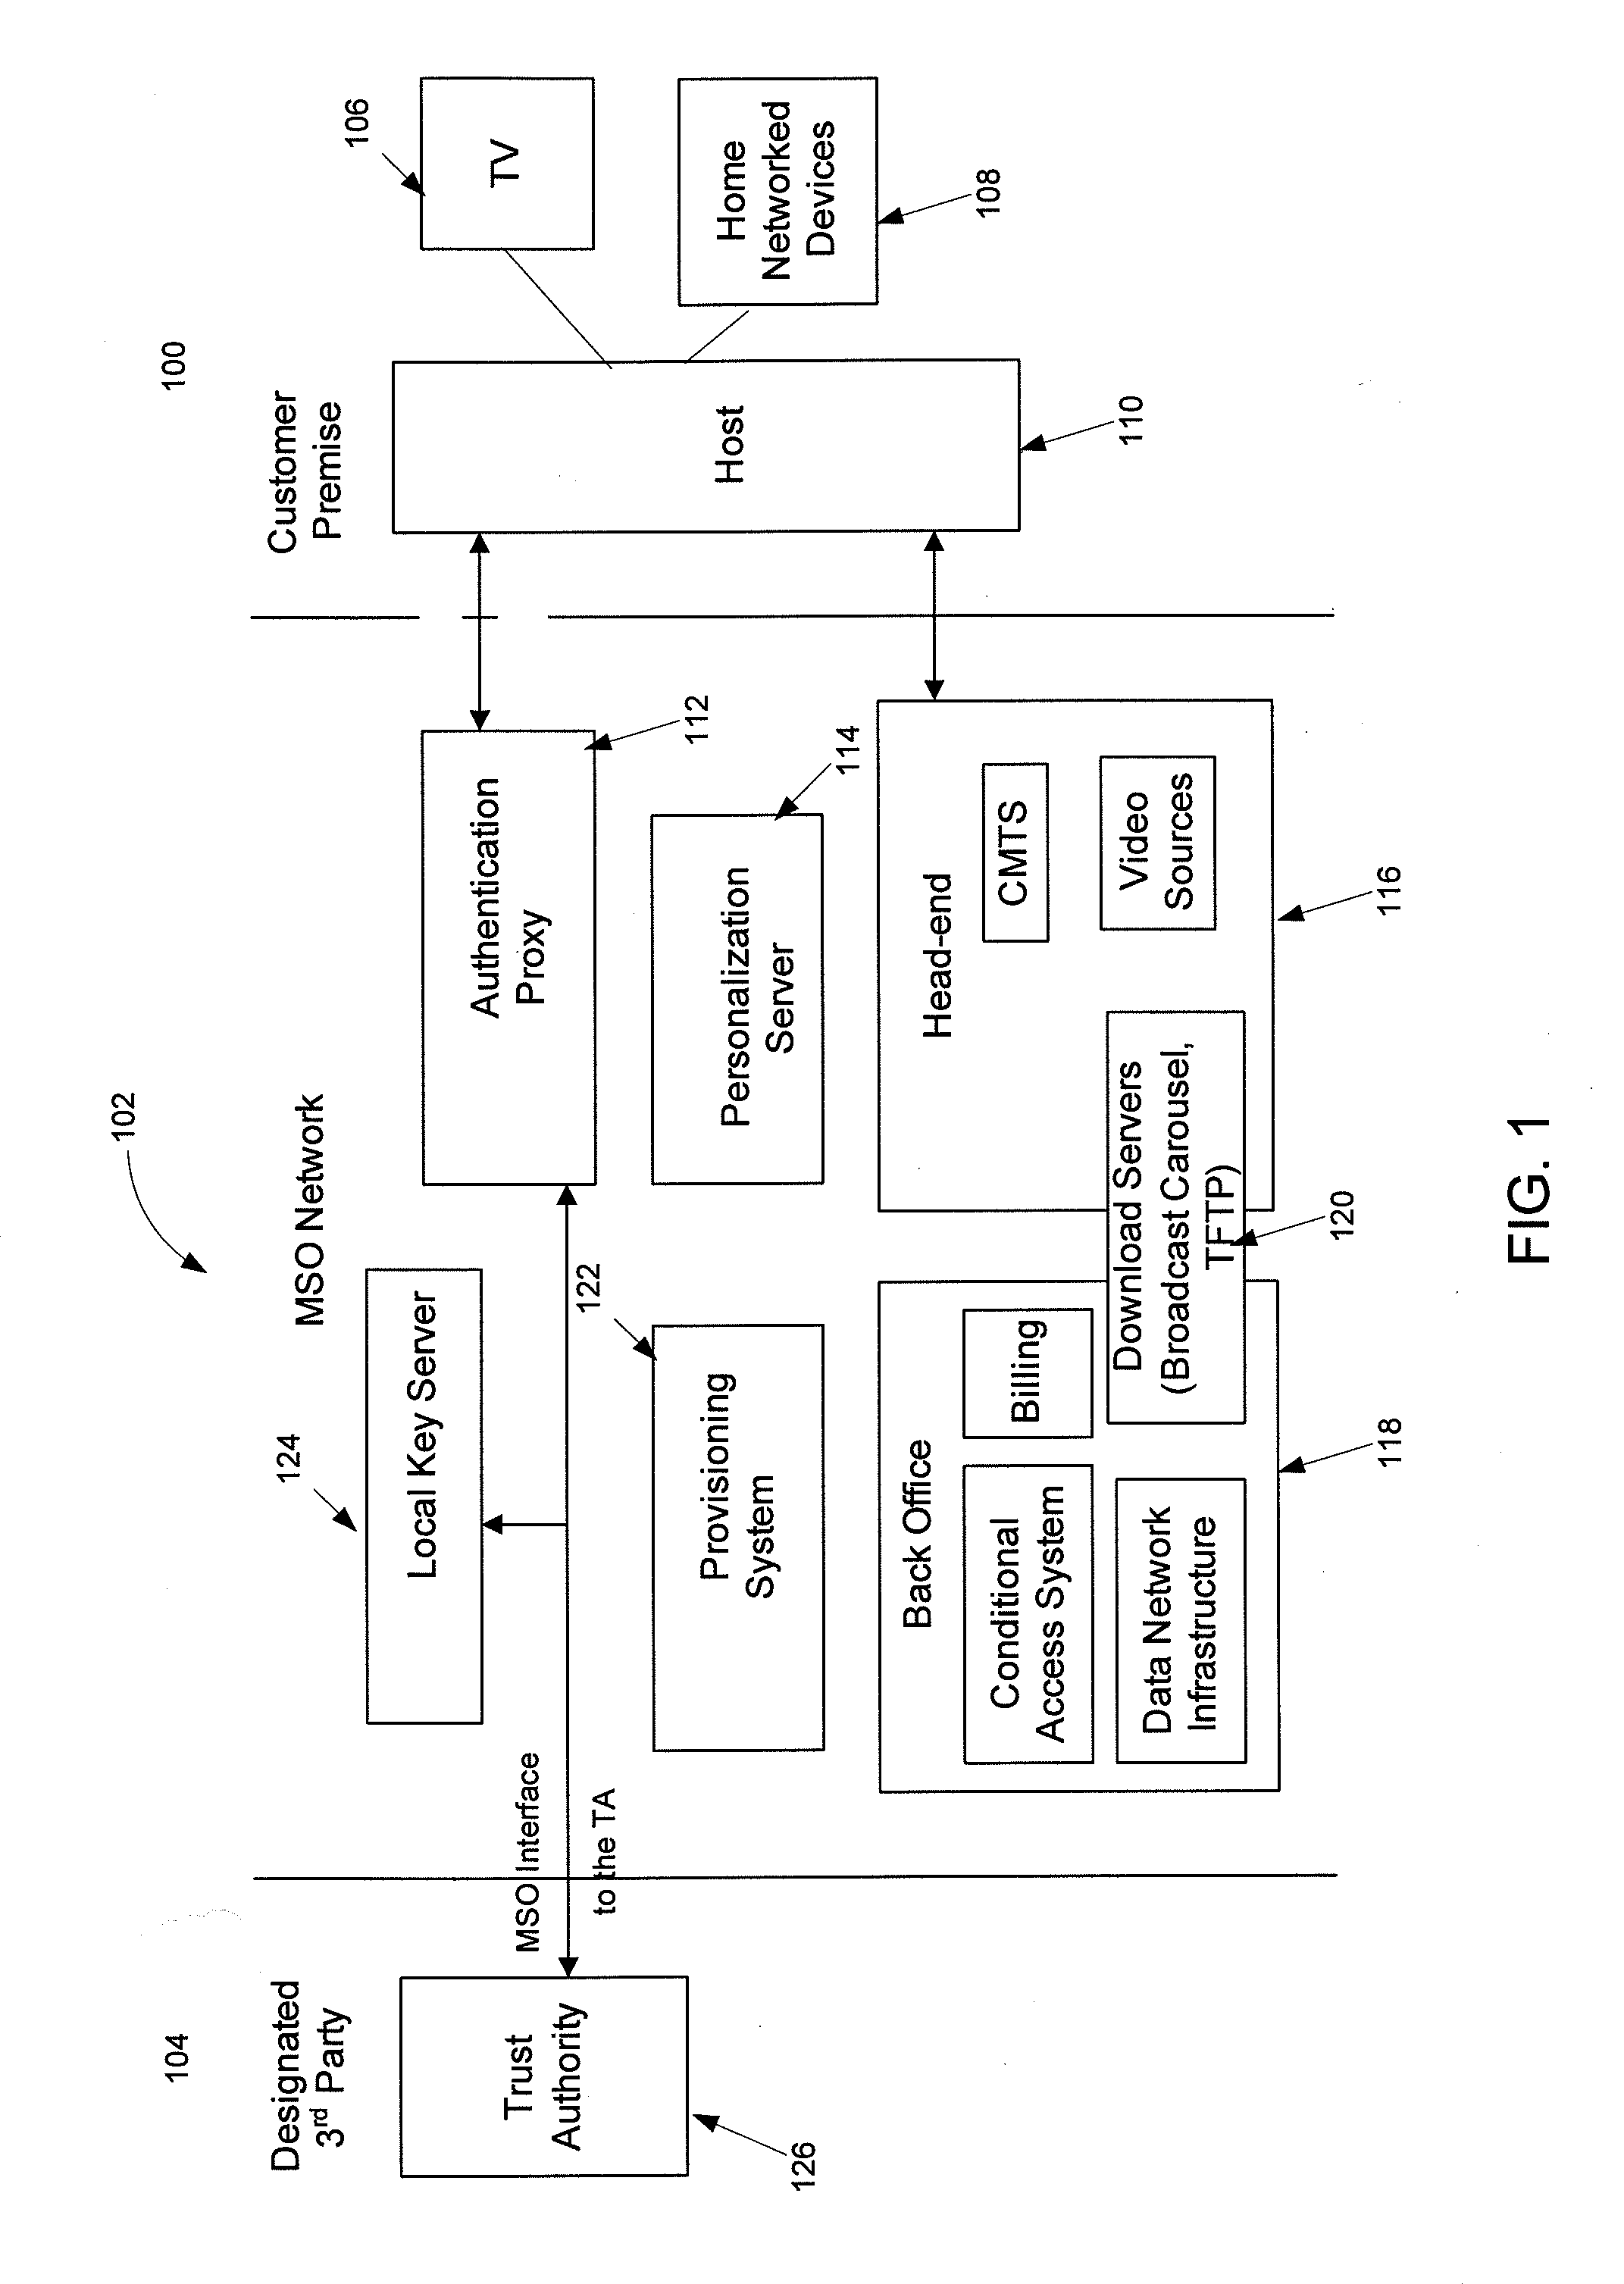 Authenticated Communication Between Security Devices